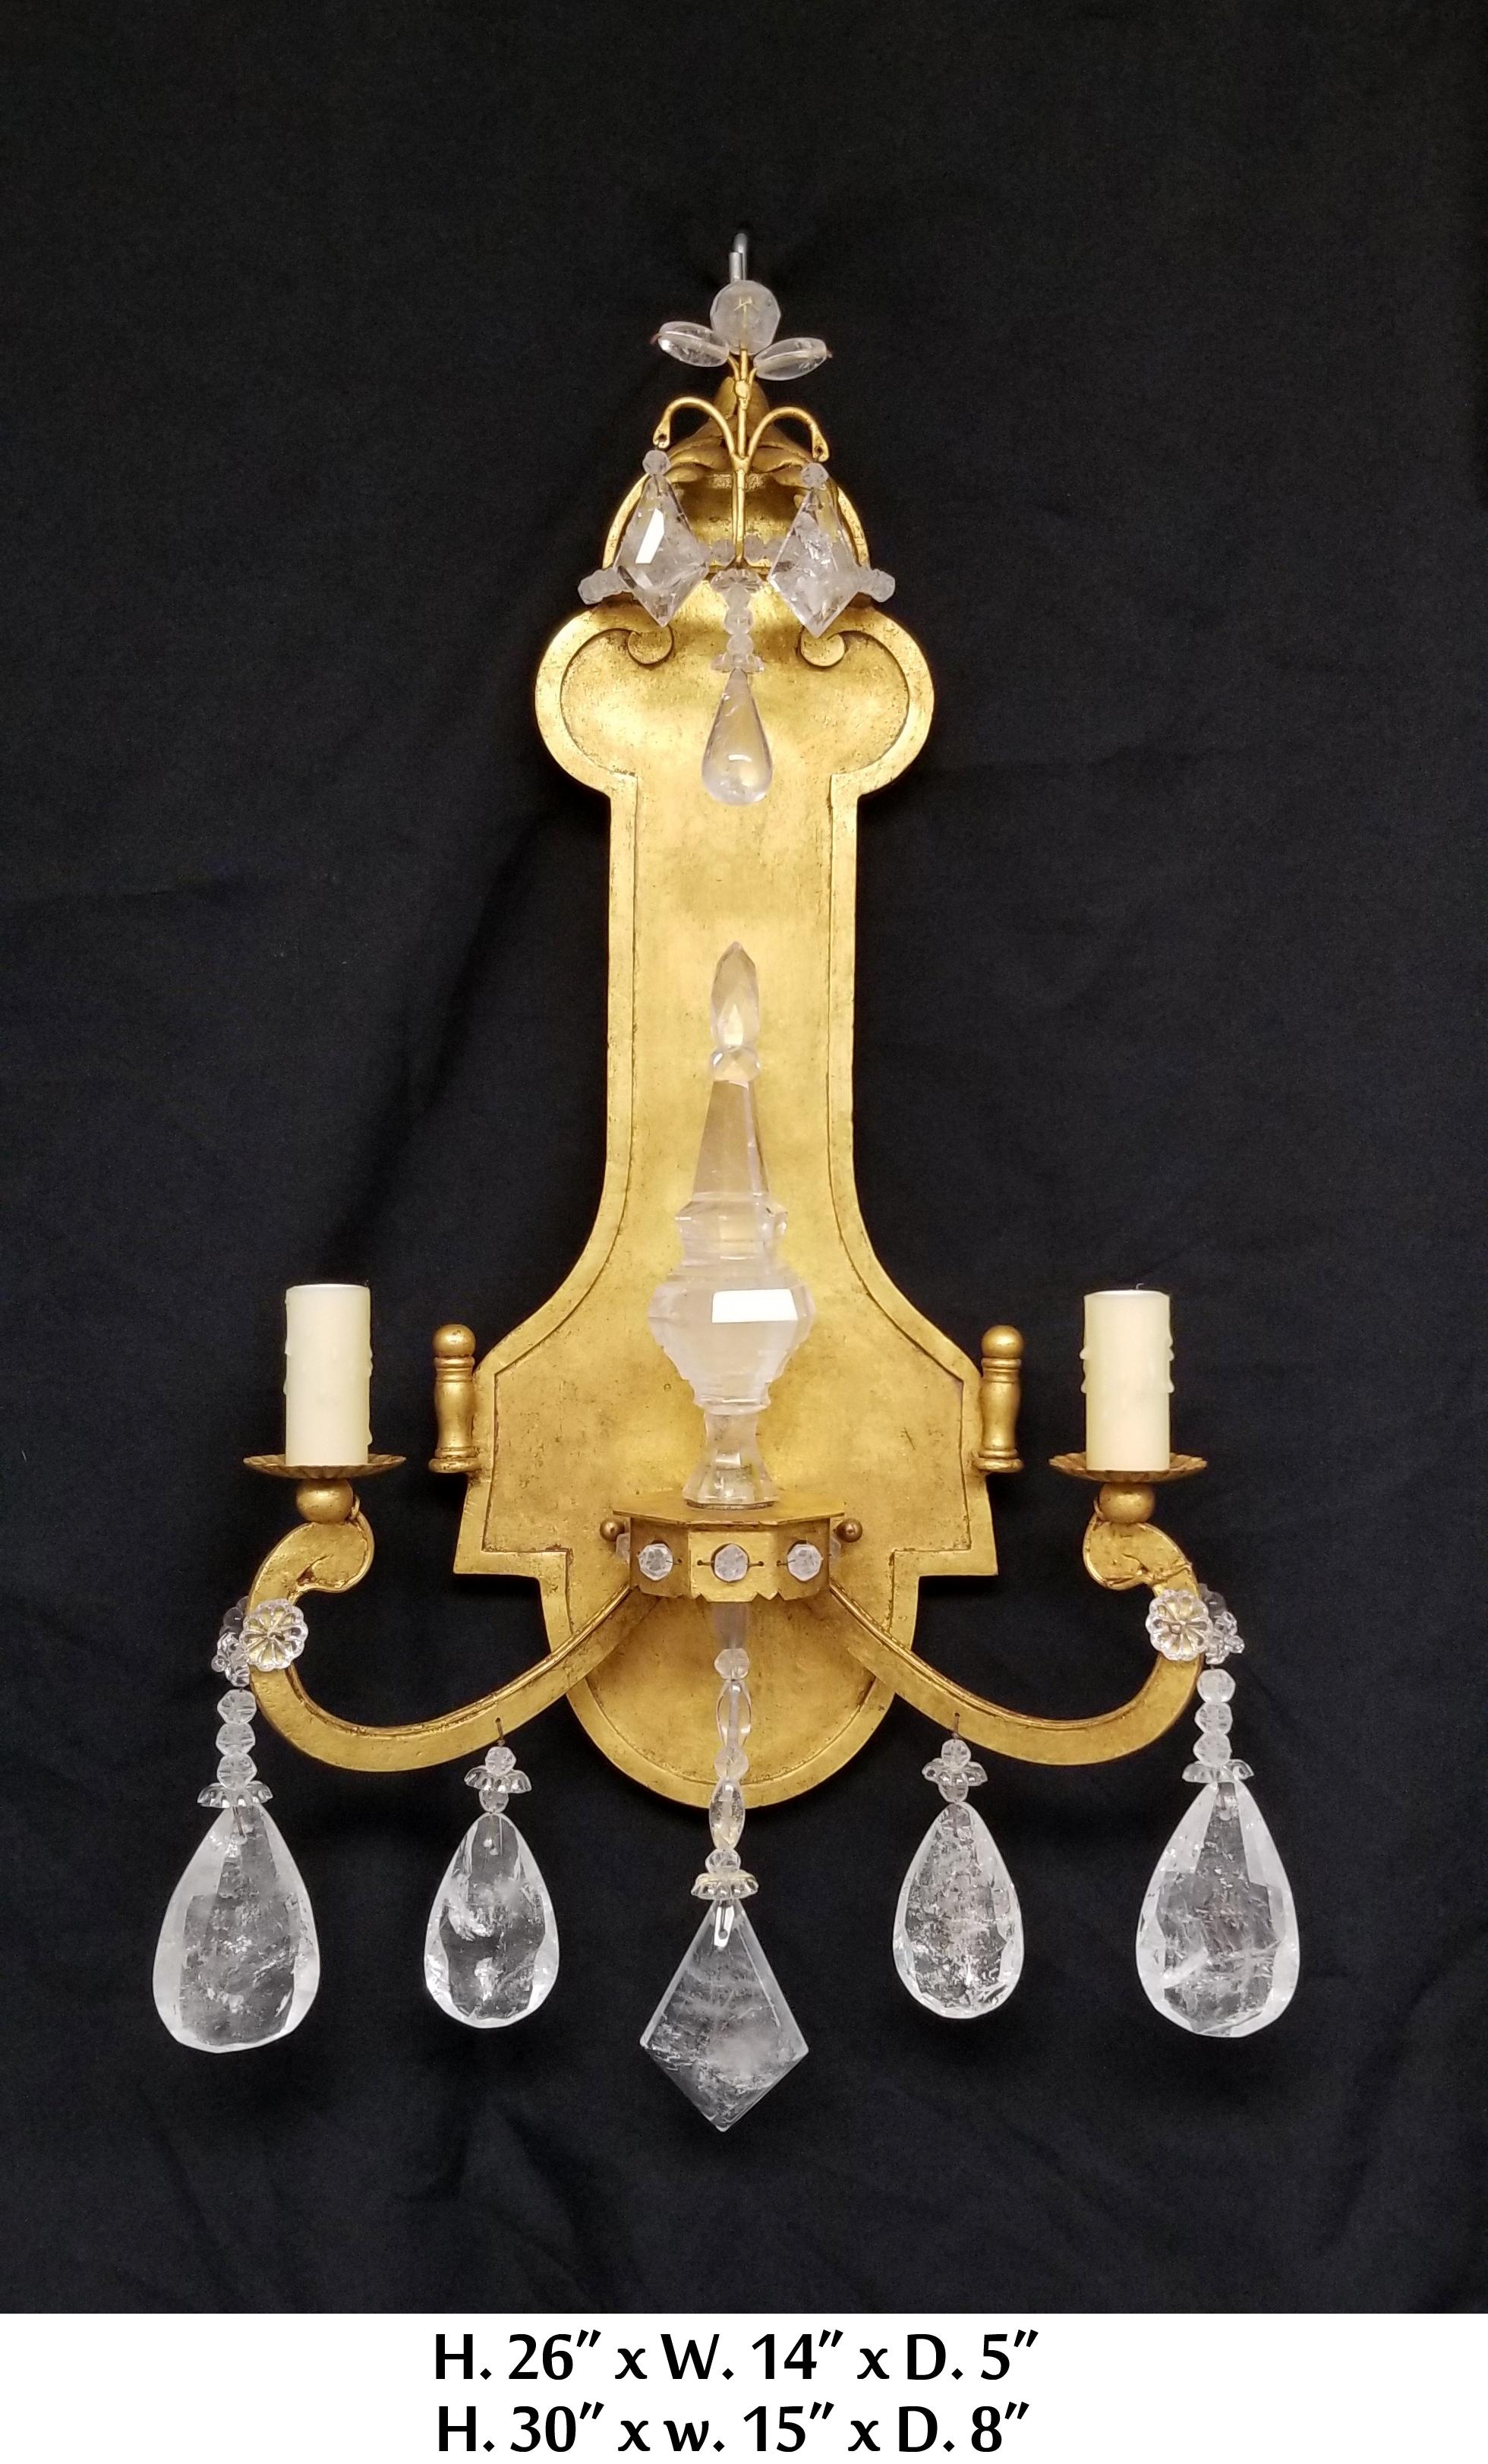 Hand-Crafted Gold Leafed Rock Crystal Sconces For Sale